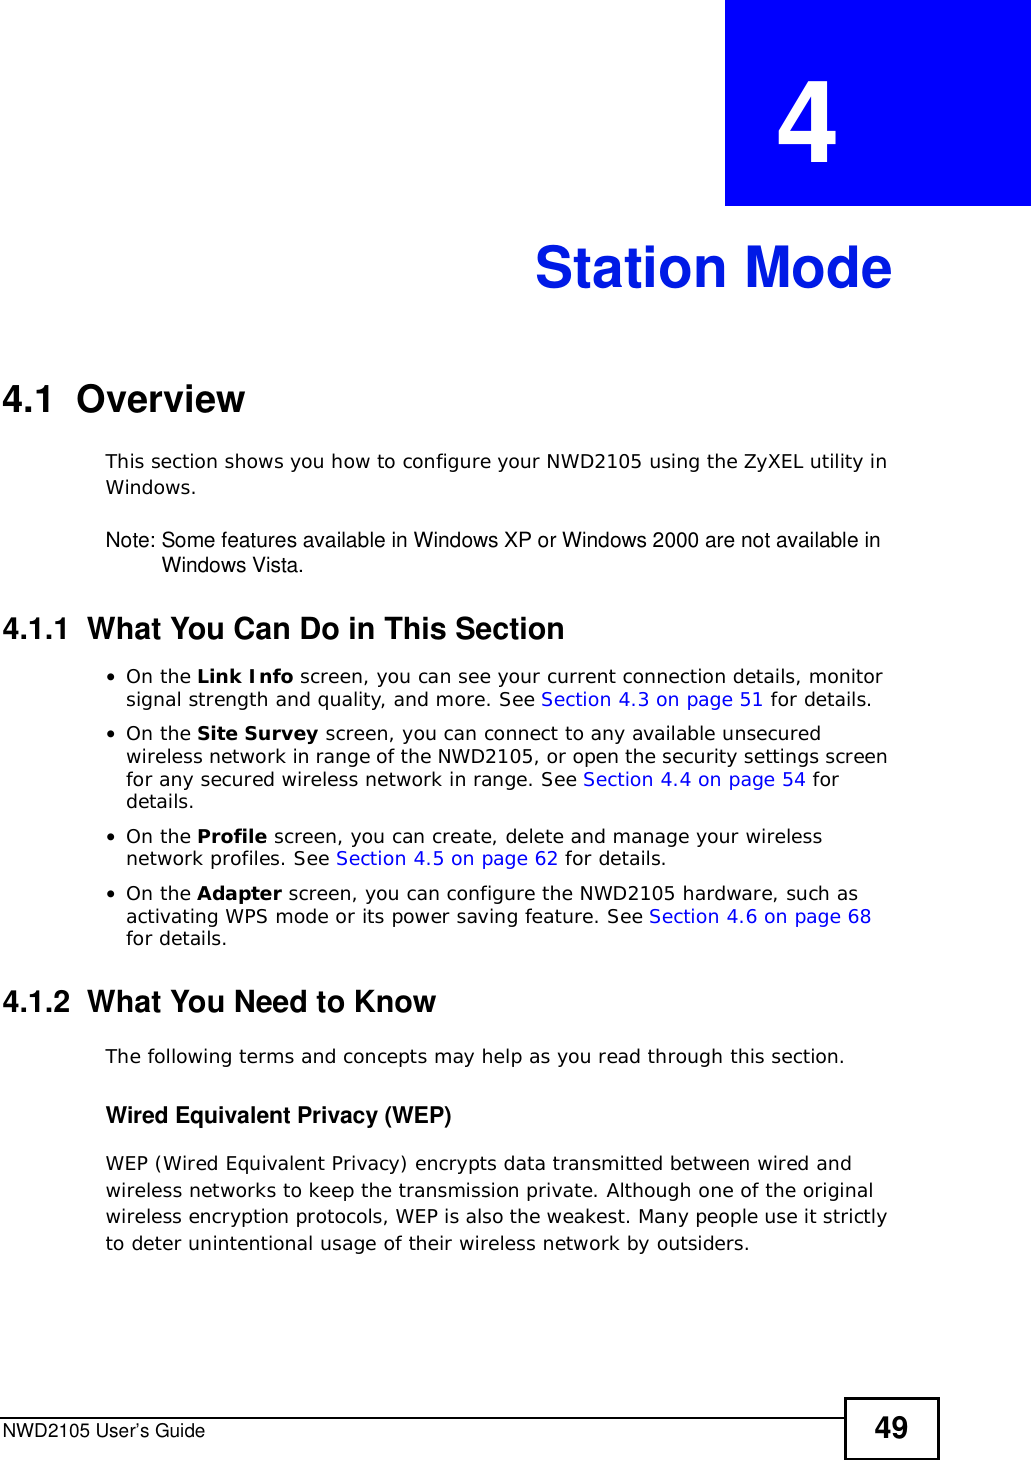 NWD2105 User’s Guide 49CHAPTER  4 Station Mode4.1  OverviewThis section shows you how to configure your NWD2105 using the ZyXEL utility in Windows.Note: Some features available in Windows XP or Windows 2000 are not available in Windows Vista.4.1.1  What You Can Do in This Section•On the Link Info screen, you can see your current connection details, monitor signal strength and quality, and more. See Section 4.3 on page 51 for details.•On the Site Survey screen, you can connect to any available unsecured wireless network in range of the NWD2105, or open the security settings screen for any secured wireless network in range. See Section 4.4 on page 54 for details.•On the Profile screen, you can create, delete and manage your wireless network profiles. See Section 4.5 on page 62 for details.•On the Adapter screen, you can configure the NWD2105 hardware, such as activating WPS mode or its power saving feature. See Section 4.6 on page 68for details.4.1.2  What You Need to KnowThe following terms and concepts may help as you read through this section.Wired Equivalent Privacy (WEP)WEP (Wired Equivalent Privacy) encrypts data transmitted between wired and wireless networks to keep the transmission private. Although one of the original wireless encryption protocols, WEP is also the weakest. Many people use it strictly to deter unintentional usage of their wireless network by outsiders.